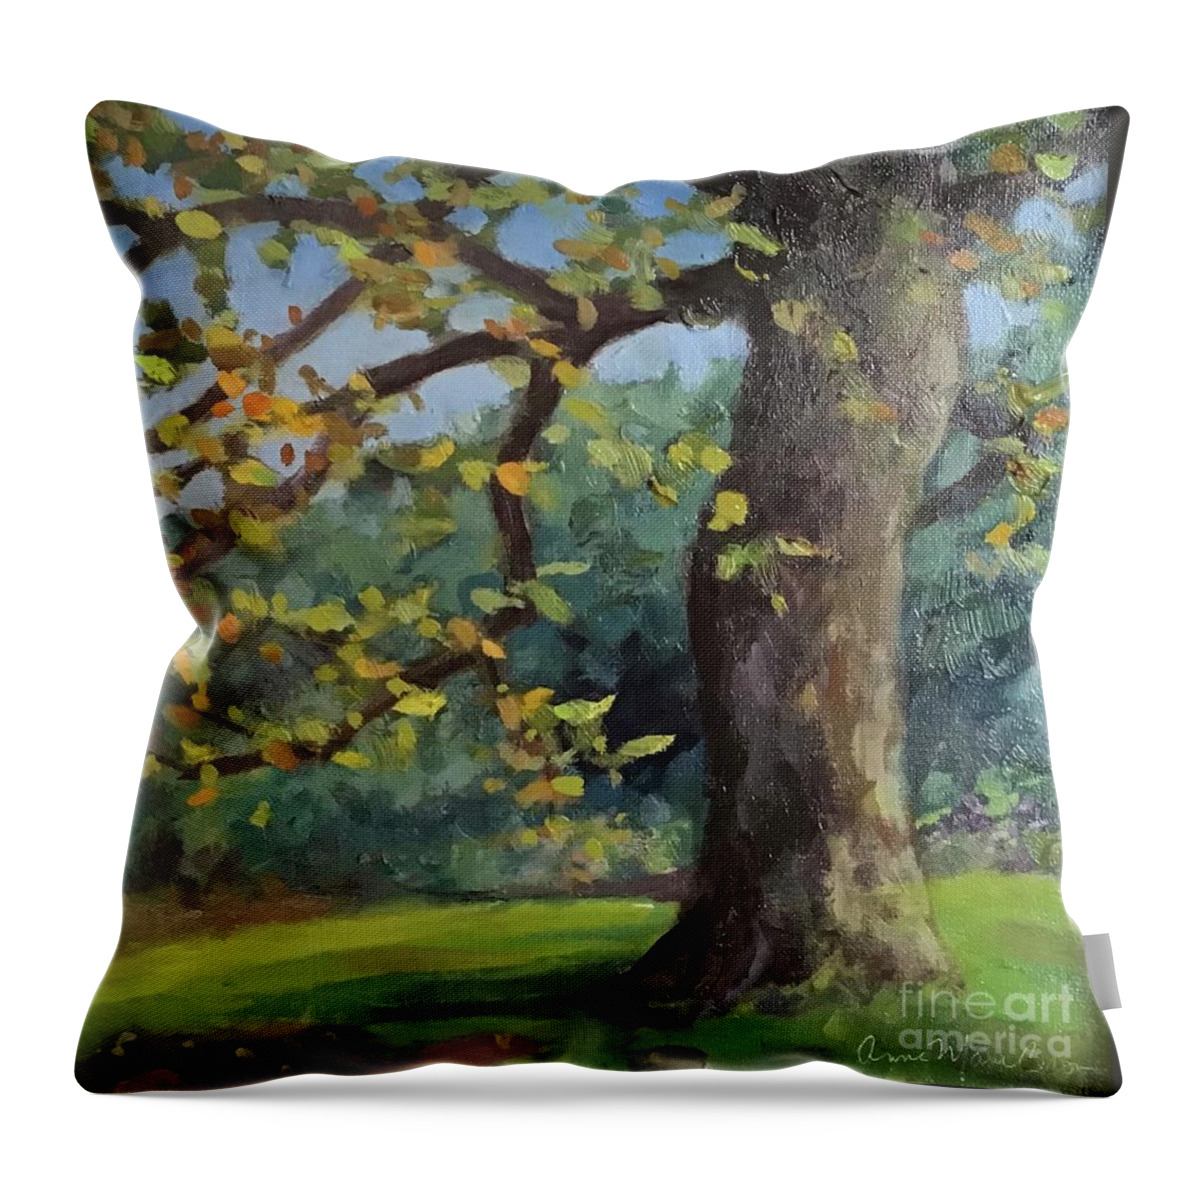 Tree Throw Pillow featuring the painting Botanical Tree by Anne Marie Brown